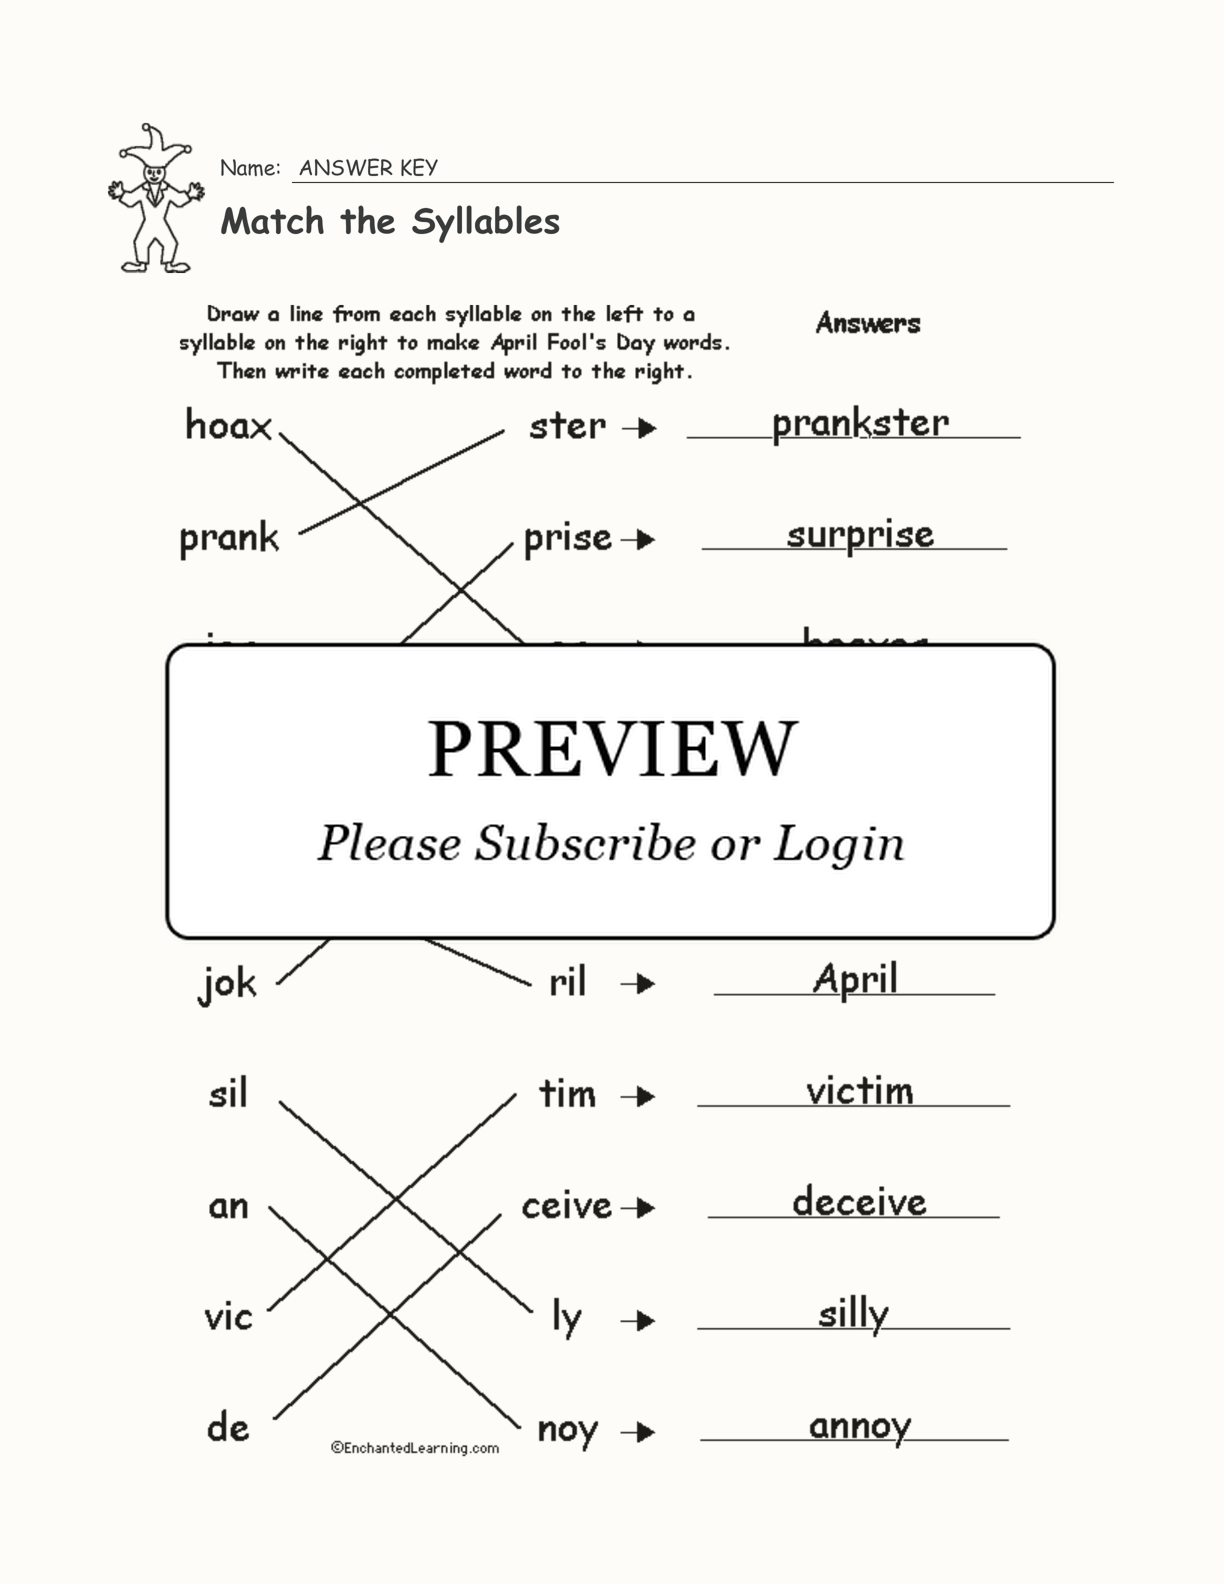 Match the Syllables interactive worksheet page 2